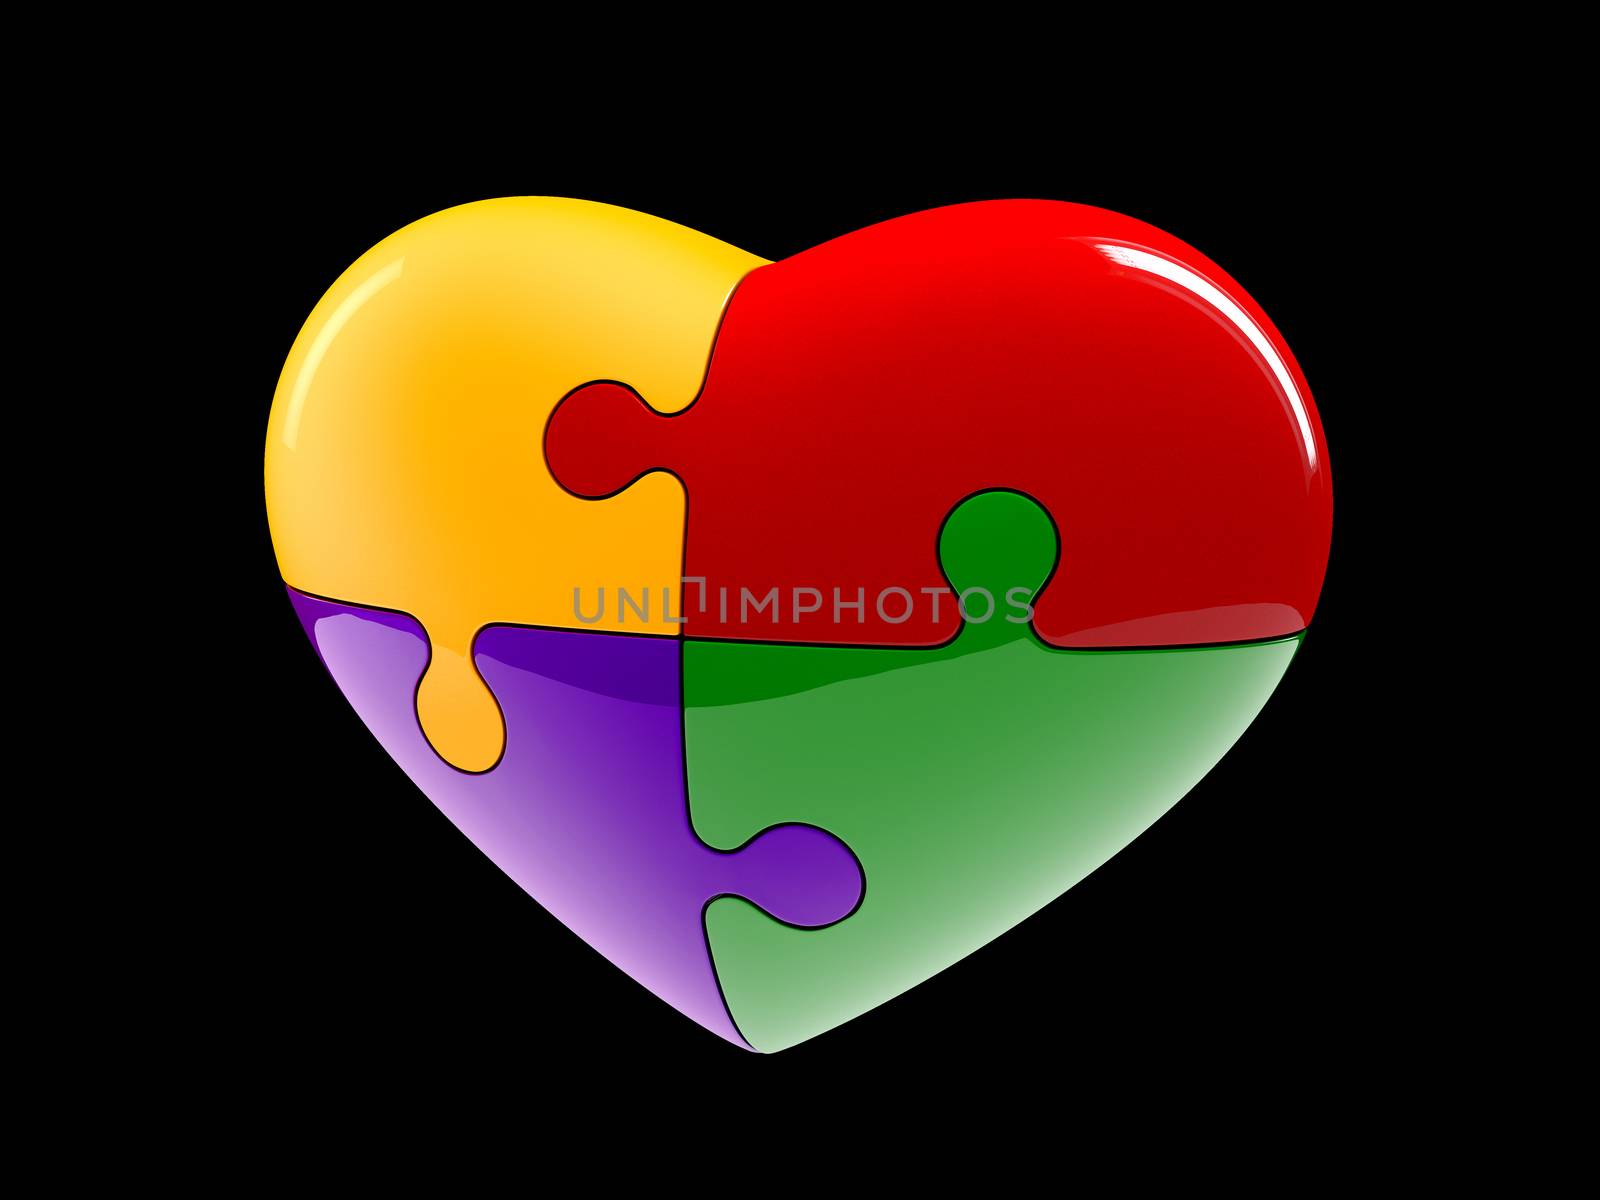 4 part jigsaw puzzle heart diagram 3d illustration isolated on black background.